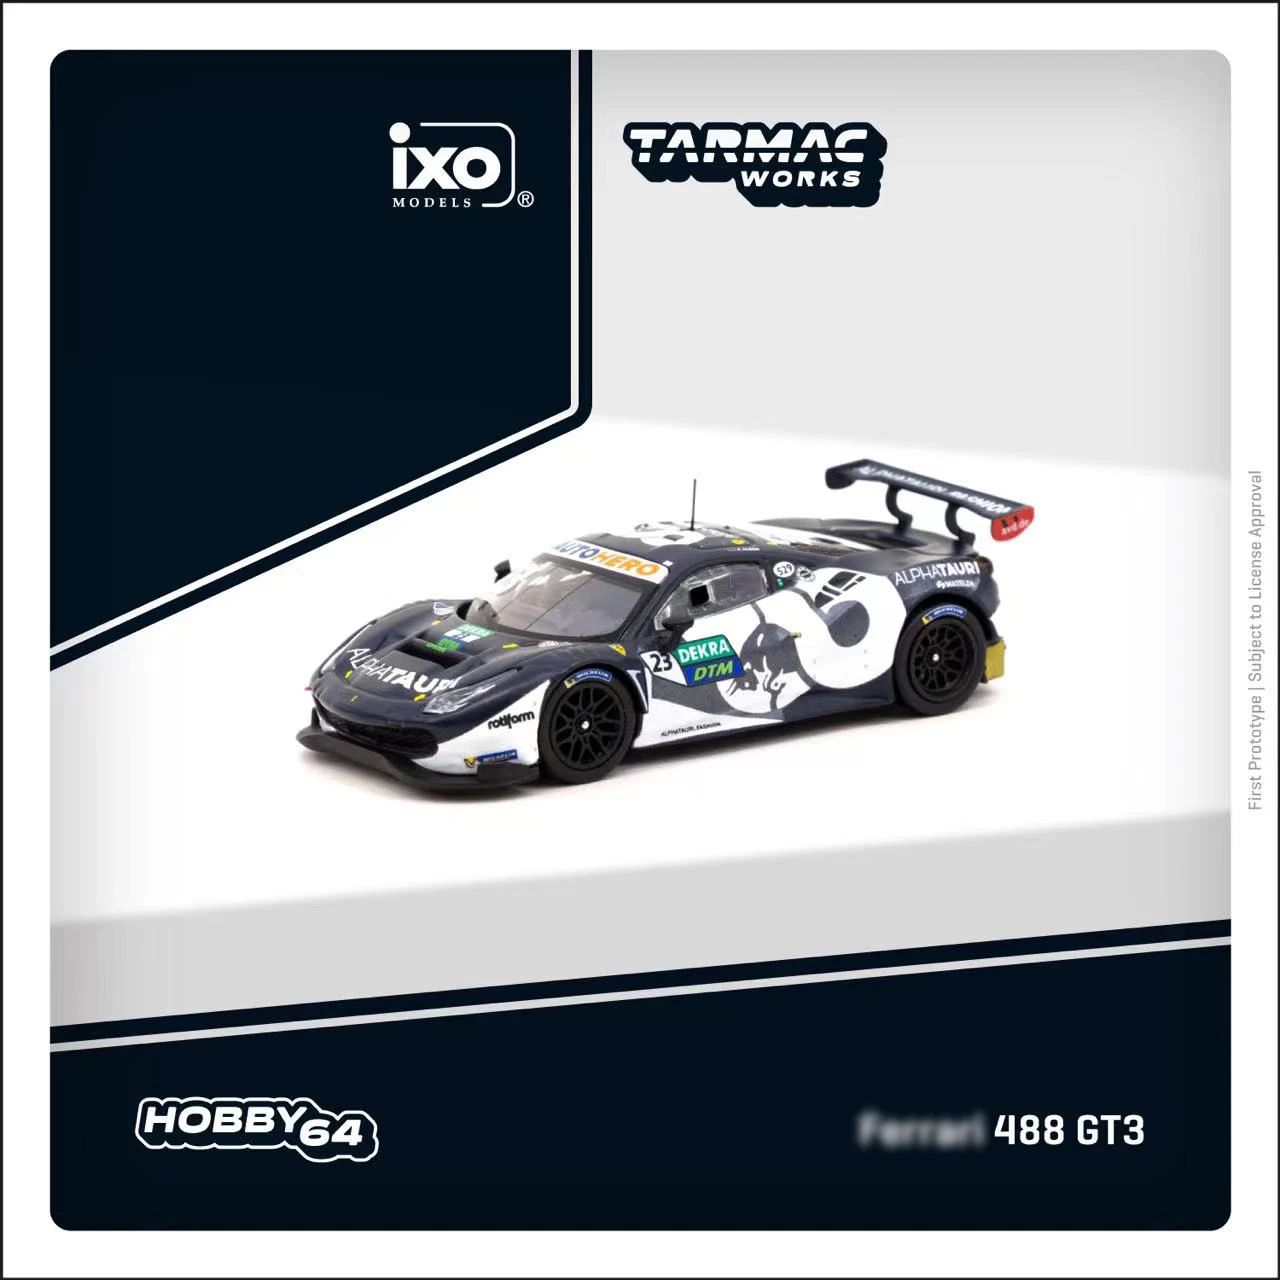 

TW In Stock 1:64 488 GT3 DTM 2021 Nurburgring Racing Diecast Diorama Car Model Collection Miniature Toys Tarmac Works